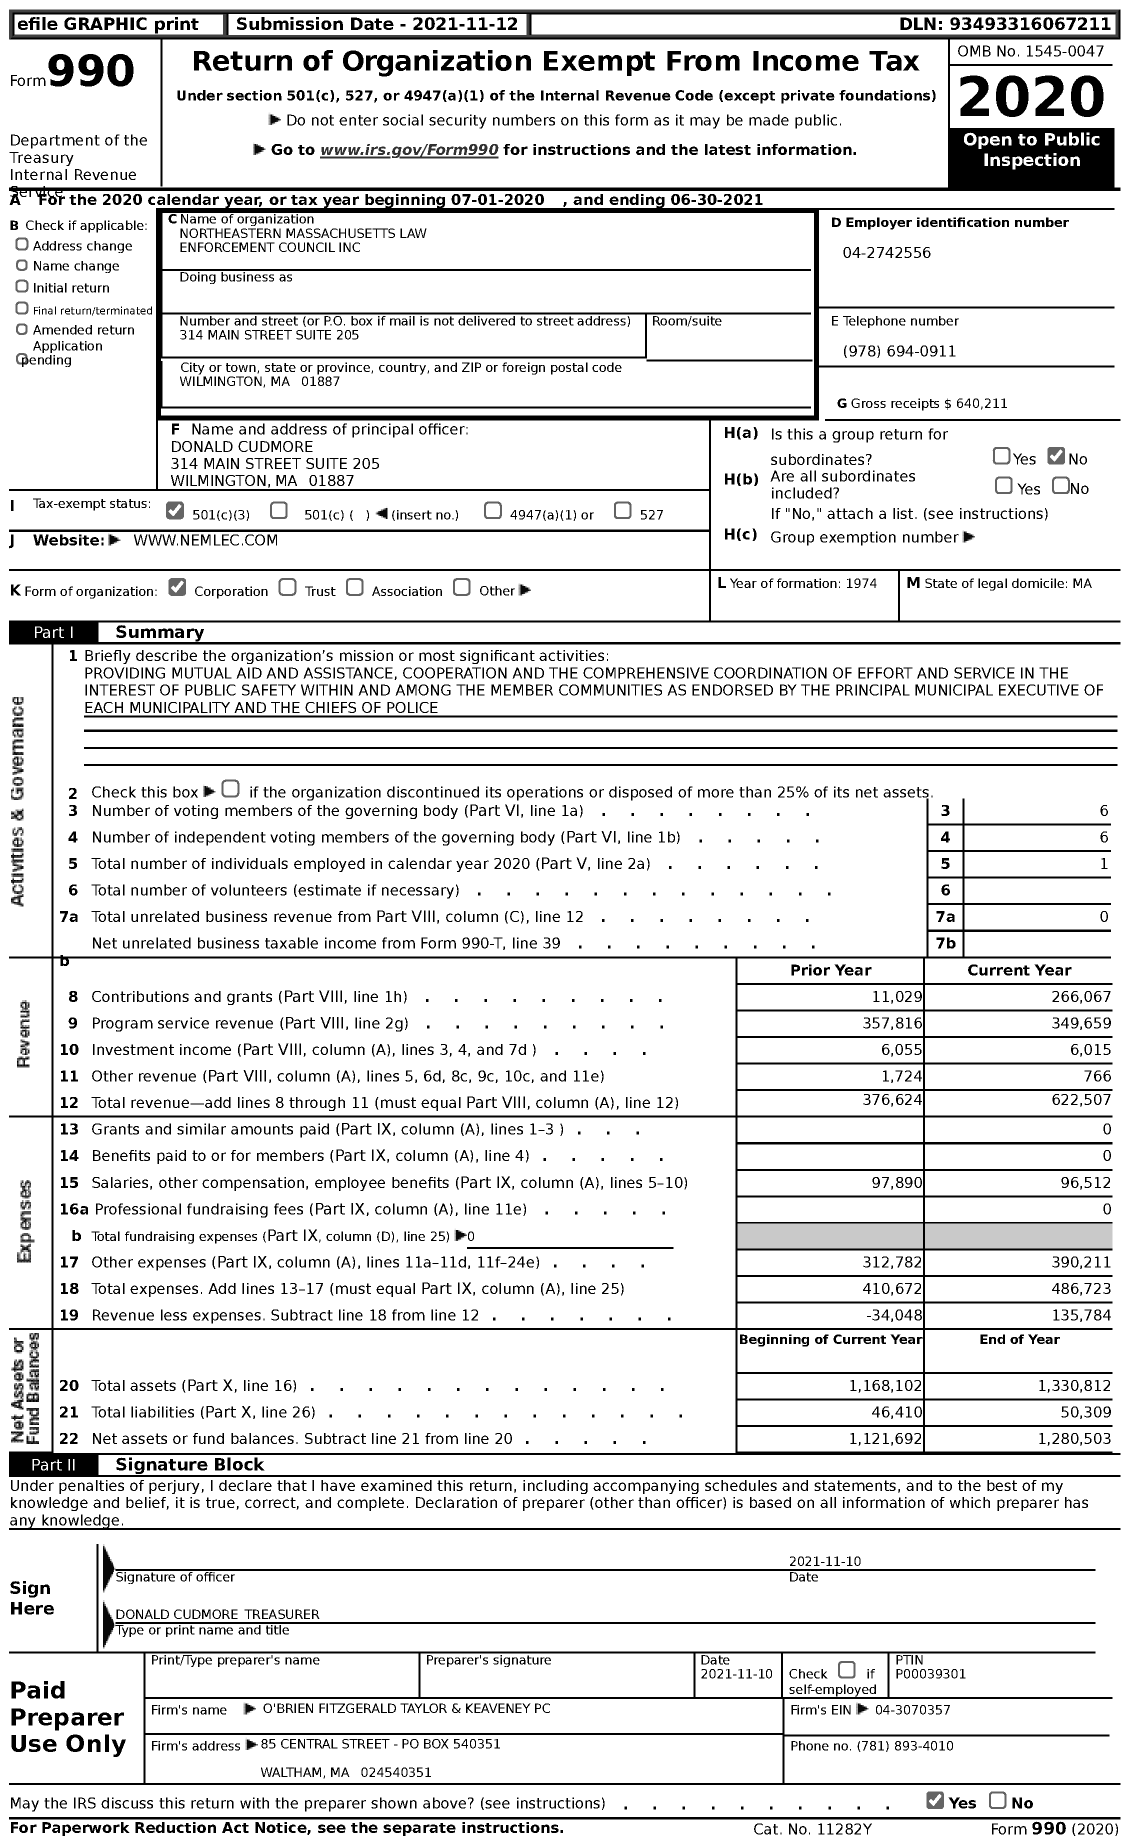 Image of first page of 2020 Form 990 for Northeastern Massachusetts Law Enforcement Council